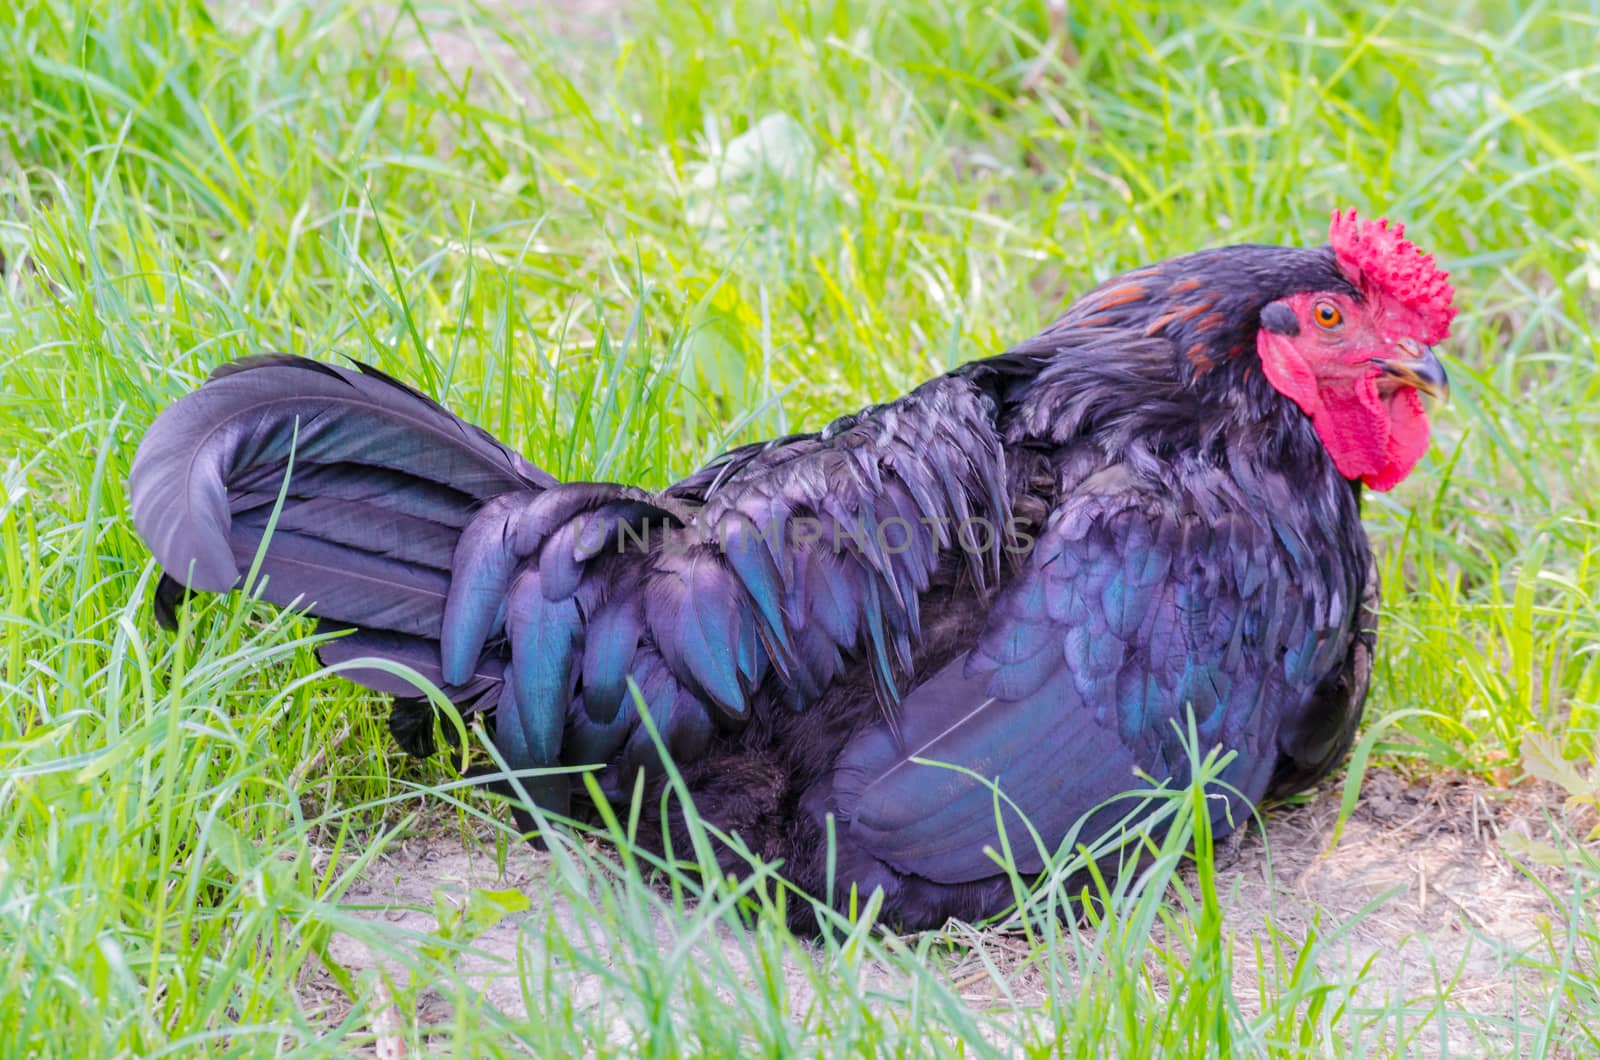 Chicken breed with the black plumage.